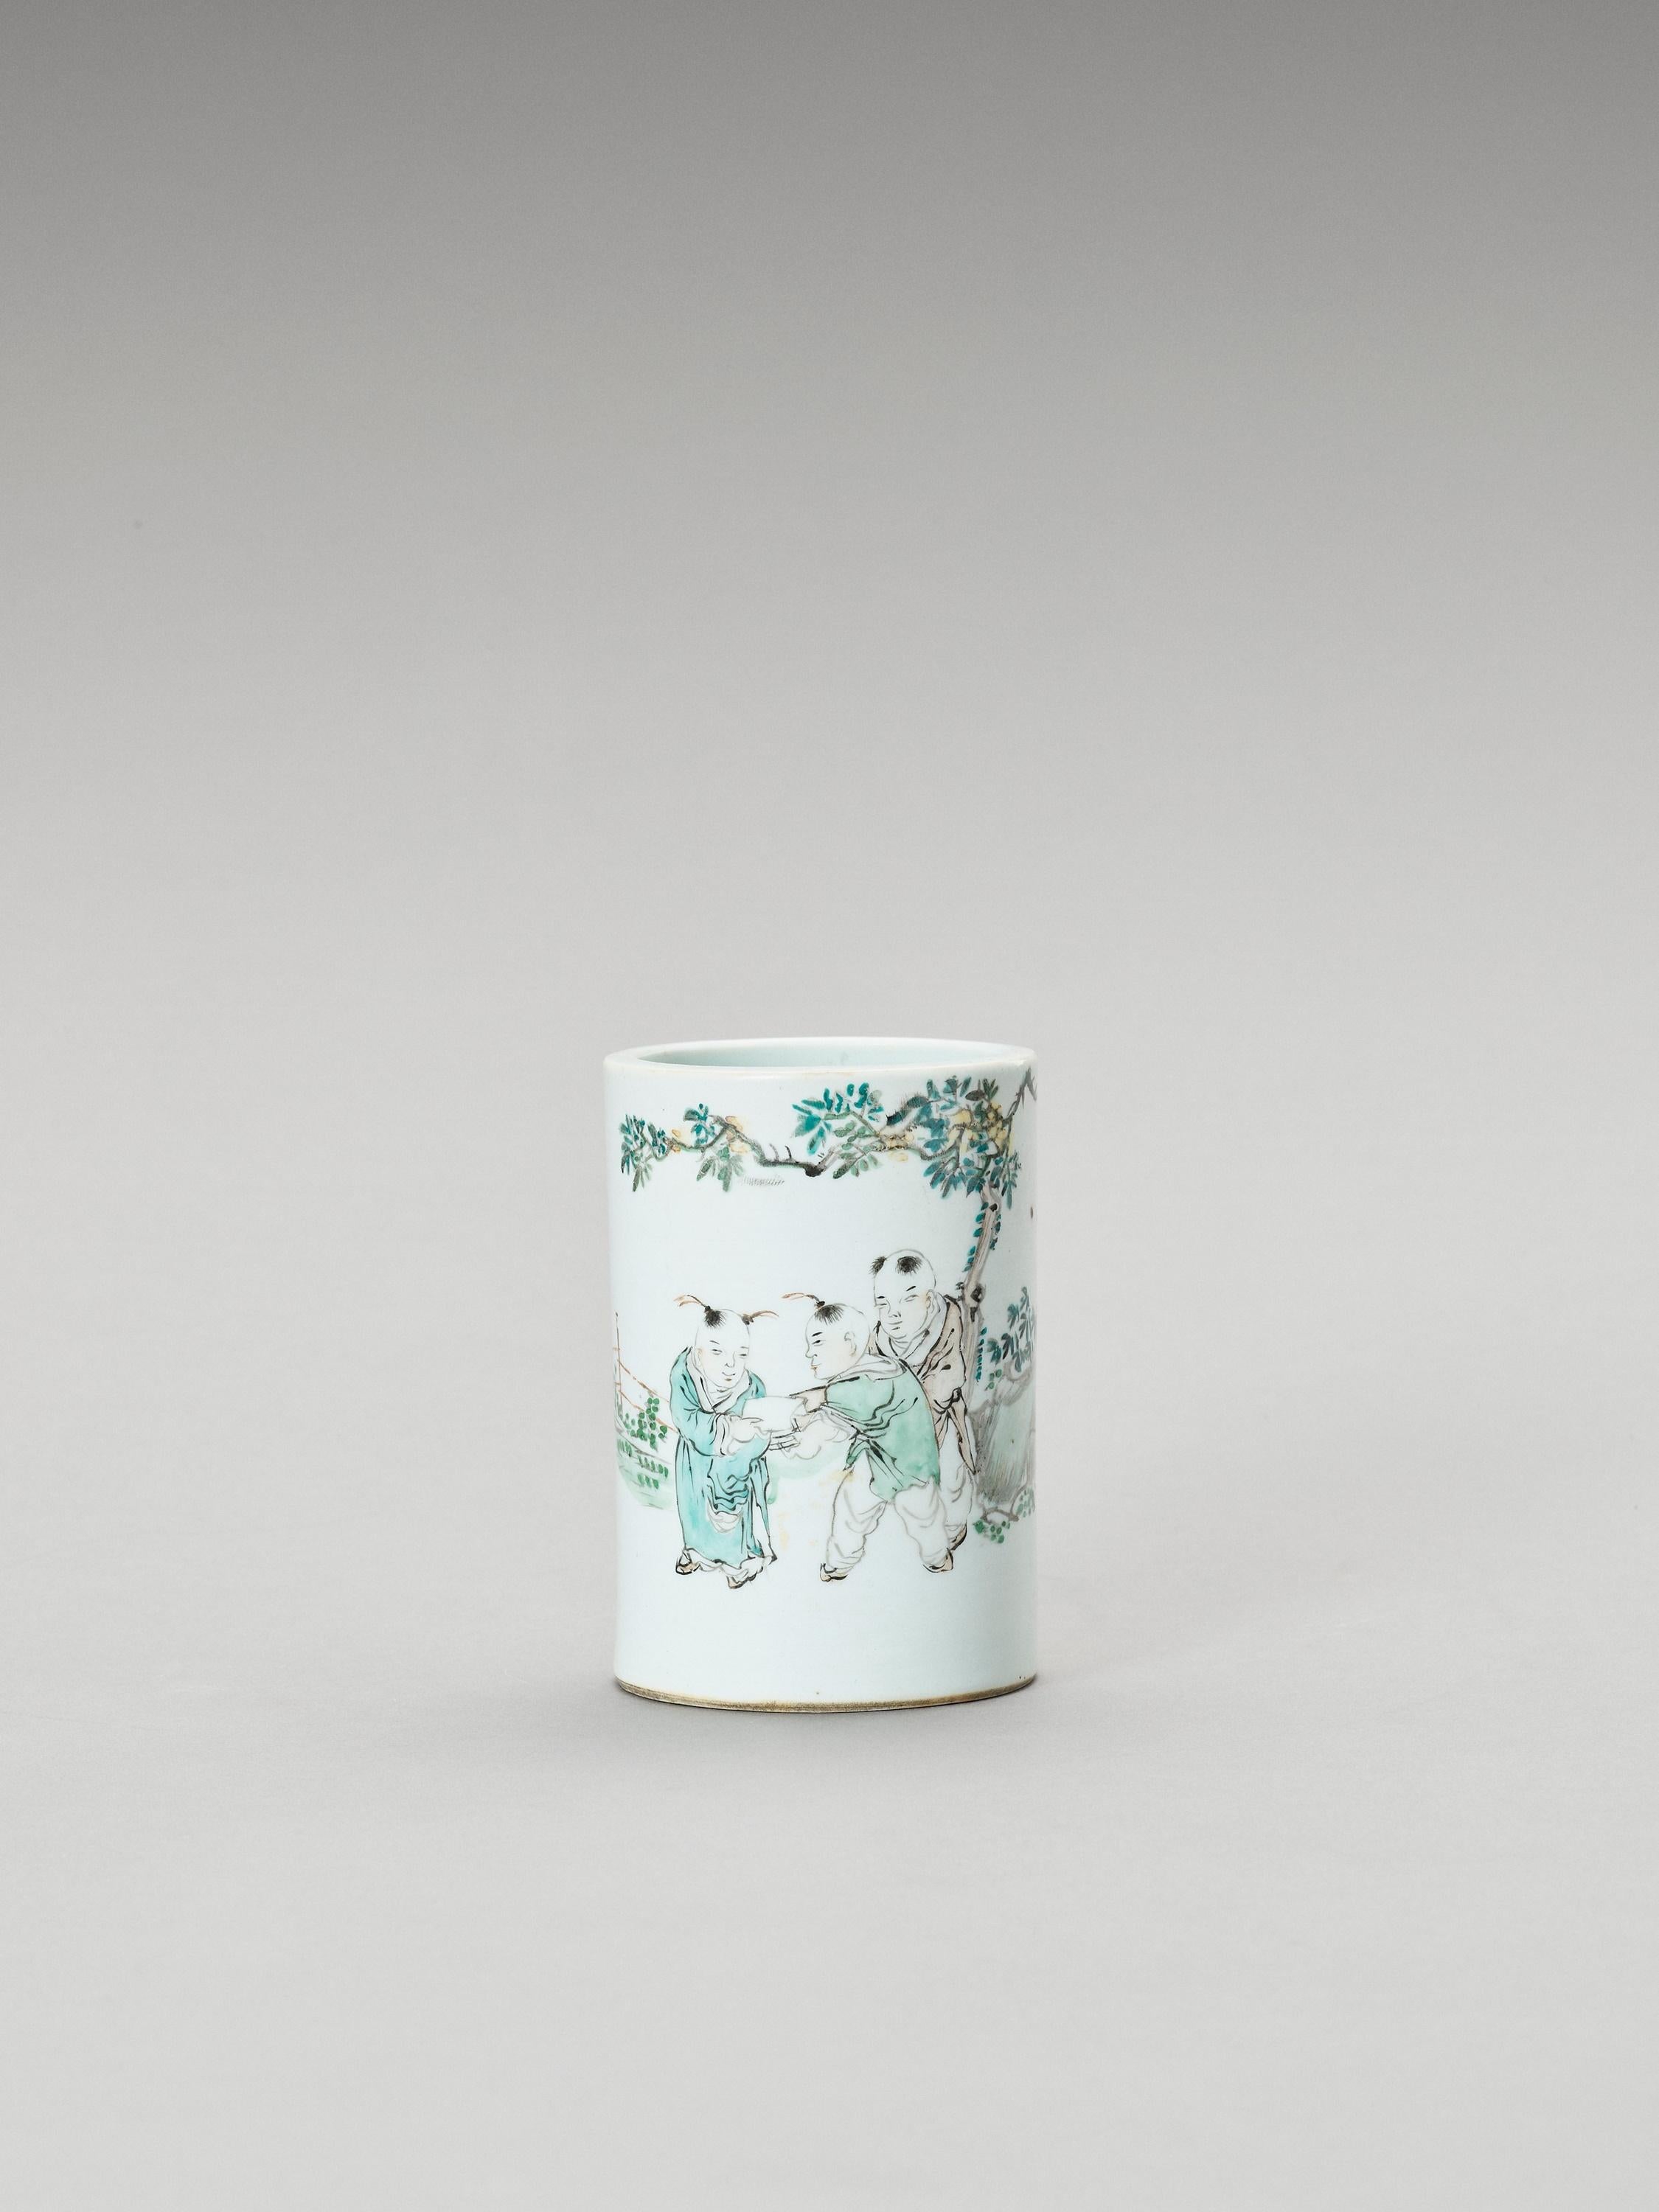 Chinese Famille Verte porcelain brush pot, Bitong, Late Qing to Republic, late 19th to early 20th century

The brush pot of cylindrical form, painted in famille verte enamels with three boys under a leafy tree next to a craggy rock, a green